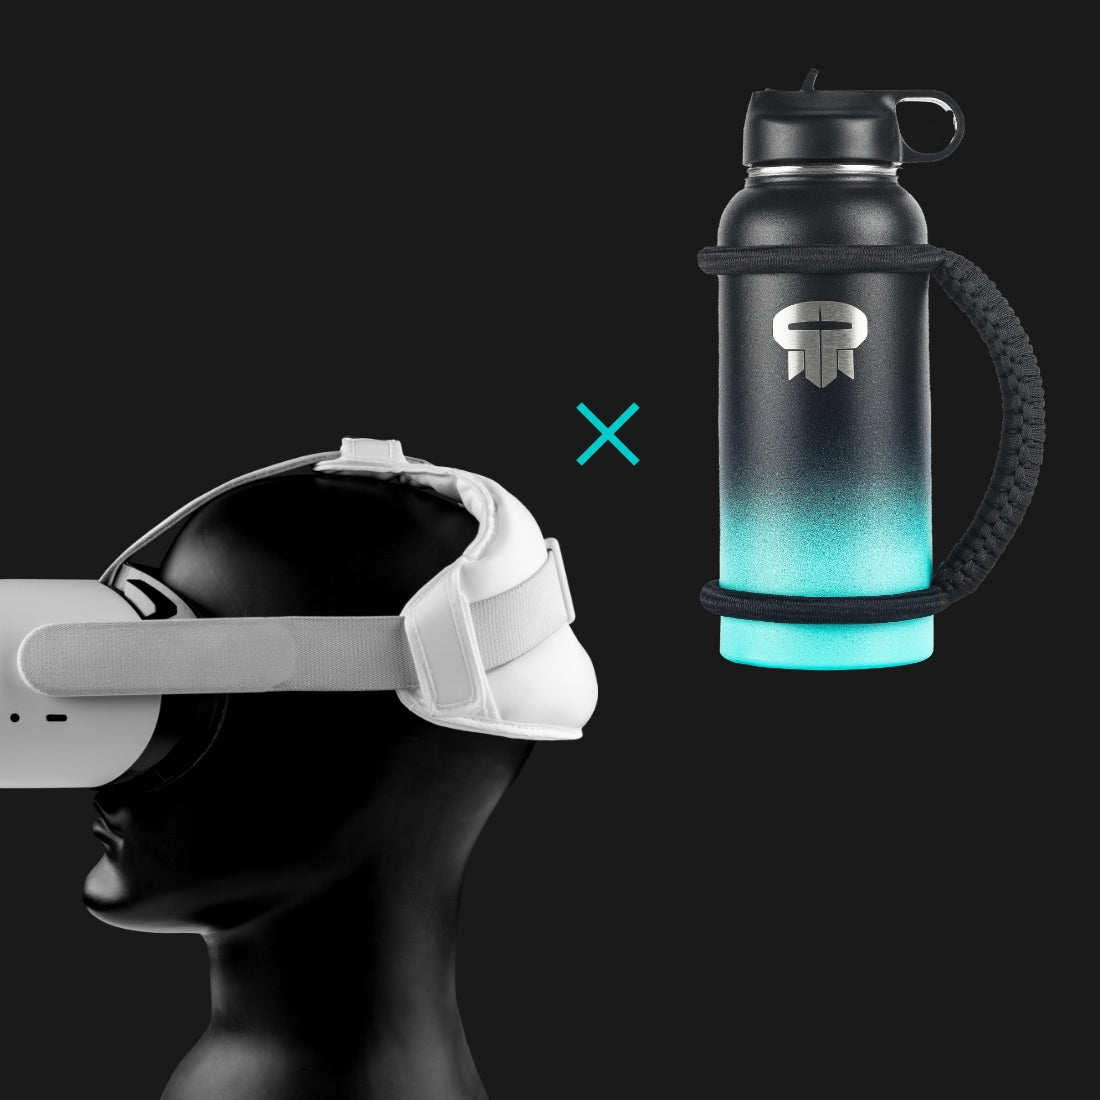 Rebuff Reality Stainless Steel Water Bottle for VR Play